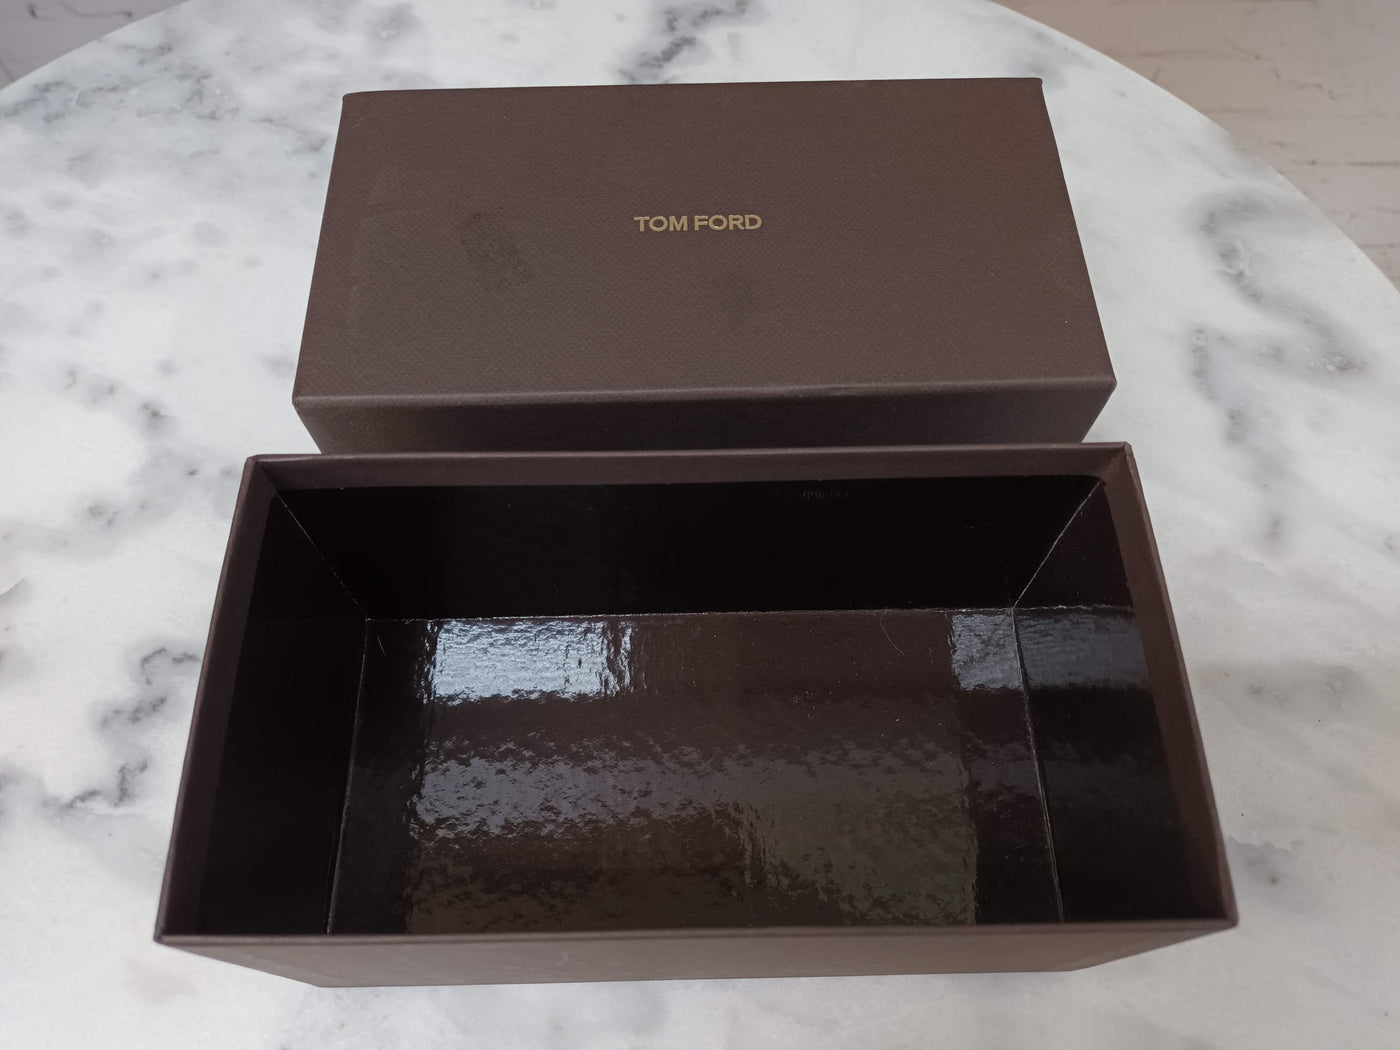 LOUIS VUITTON AUTHENTIC GIFT BOX EMPTY PULL DRAWER WITH AUTHENTICITY  CERTIFICATE